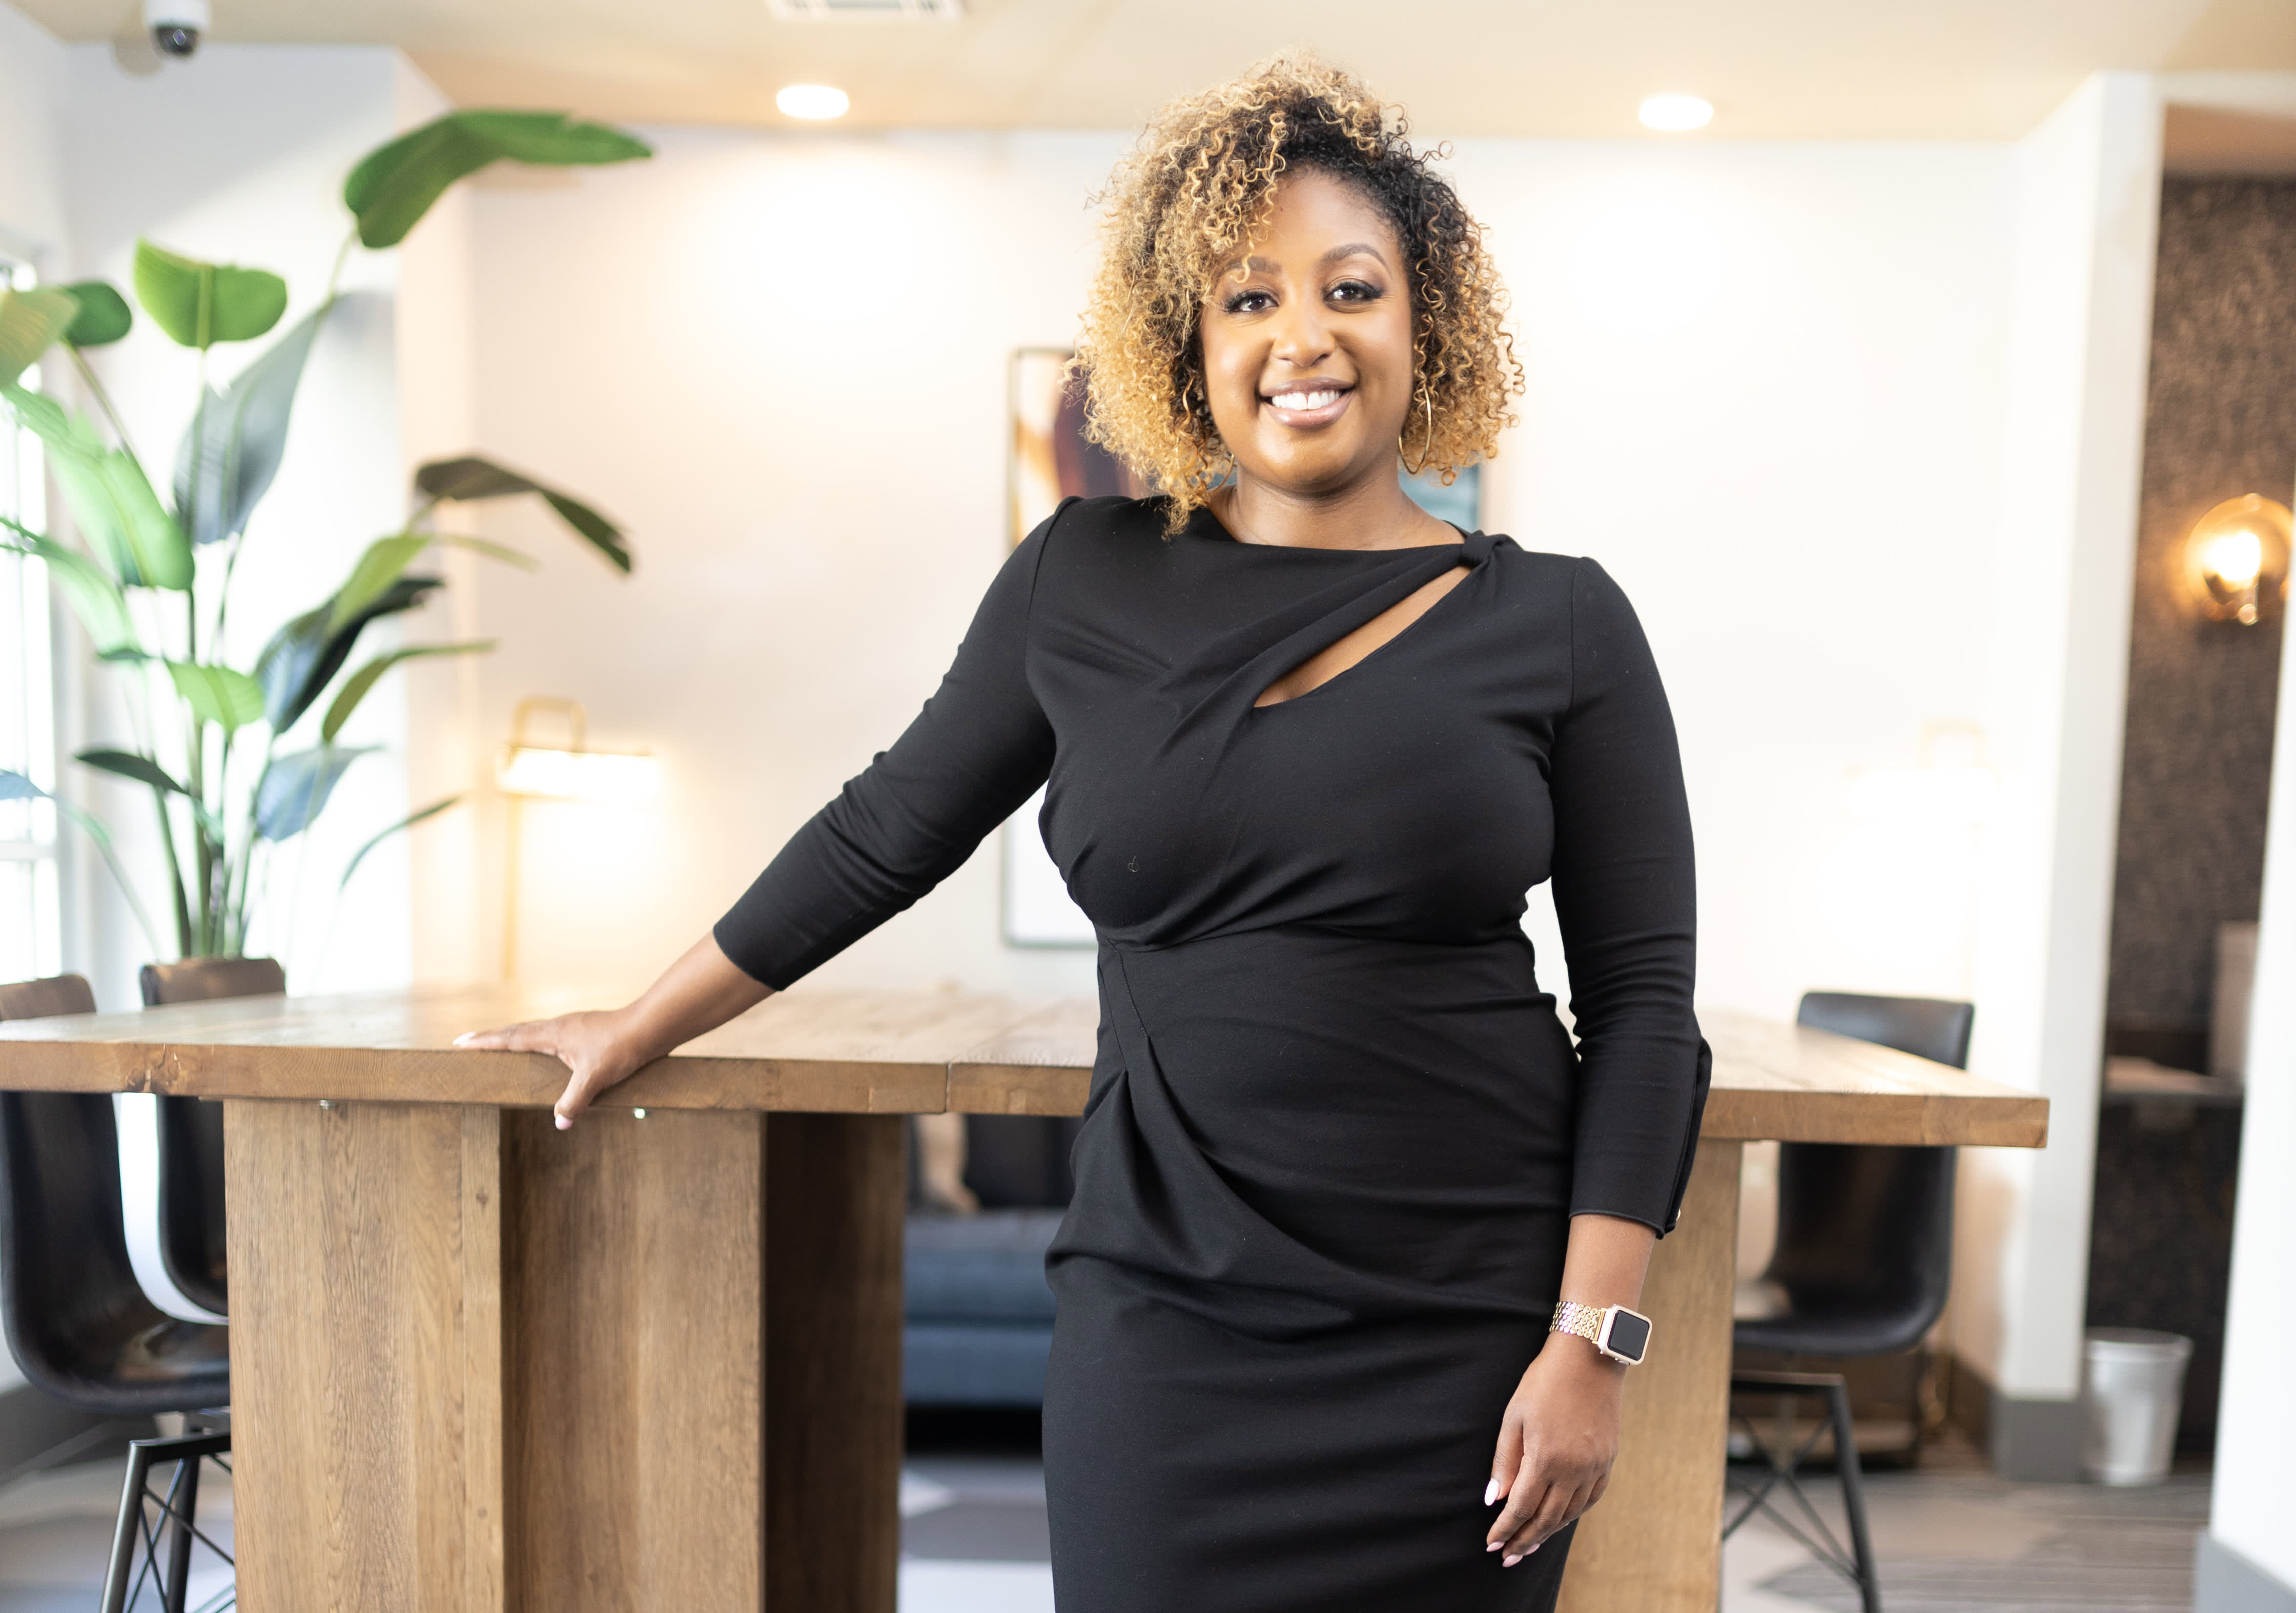 Kamila Elliott, the first Black person to head CFP Board of Standards,  plans to make changes to the field by bringing in more people of color